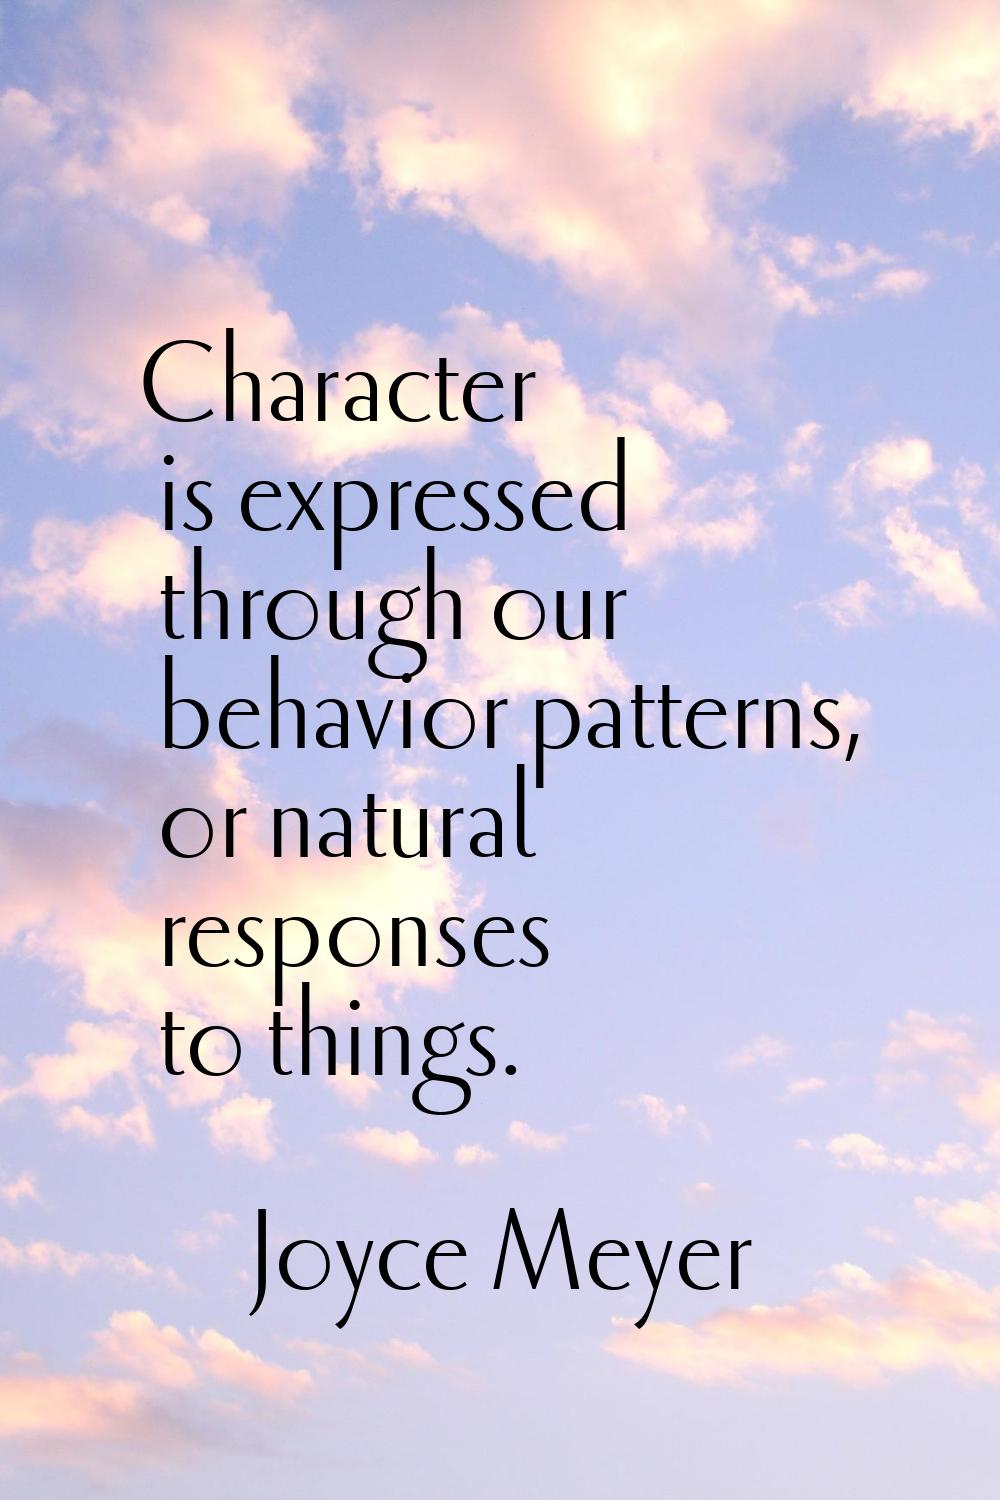 Character is expressed through our behavior patterns, or natural responses to things.